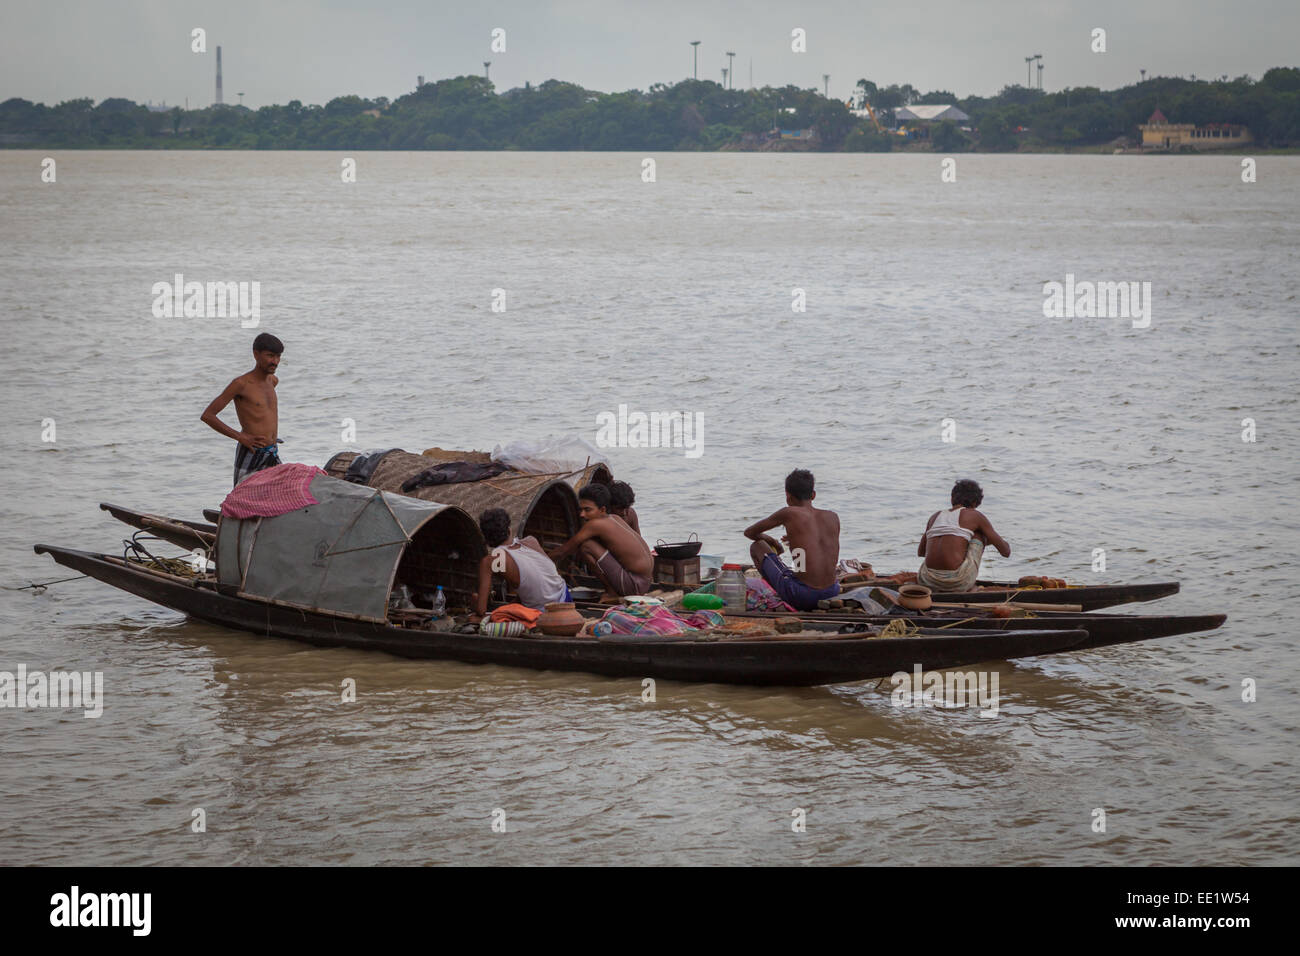 Men travelling by boat, flowing on Hooghly river in Kolkata, West Bengal, India. Stock Photo